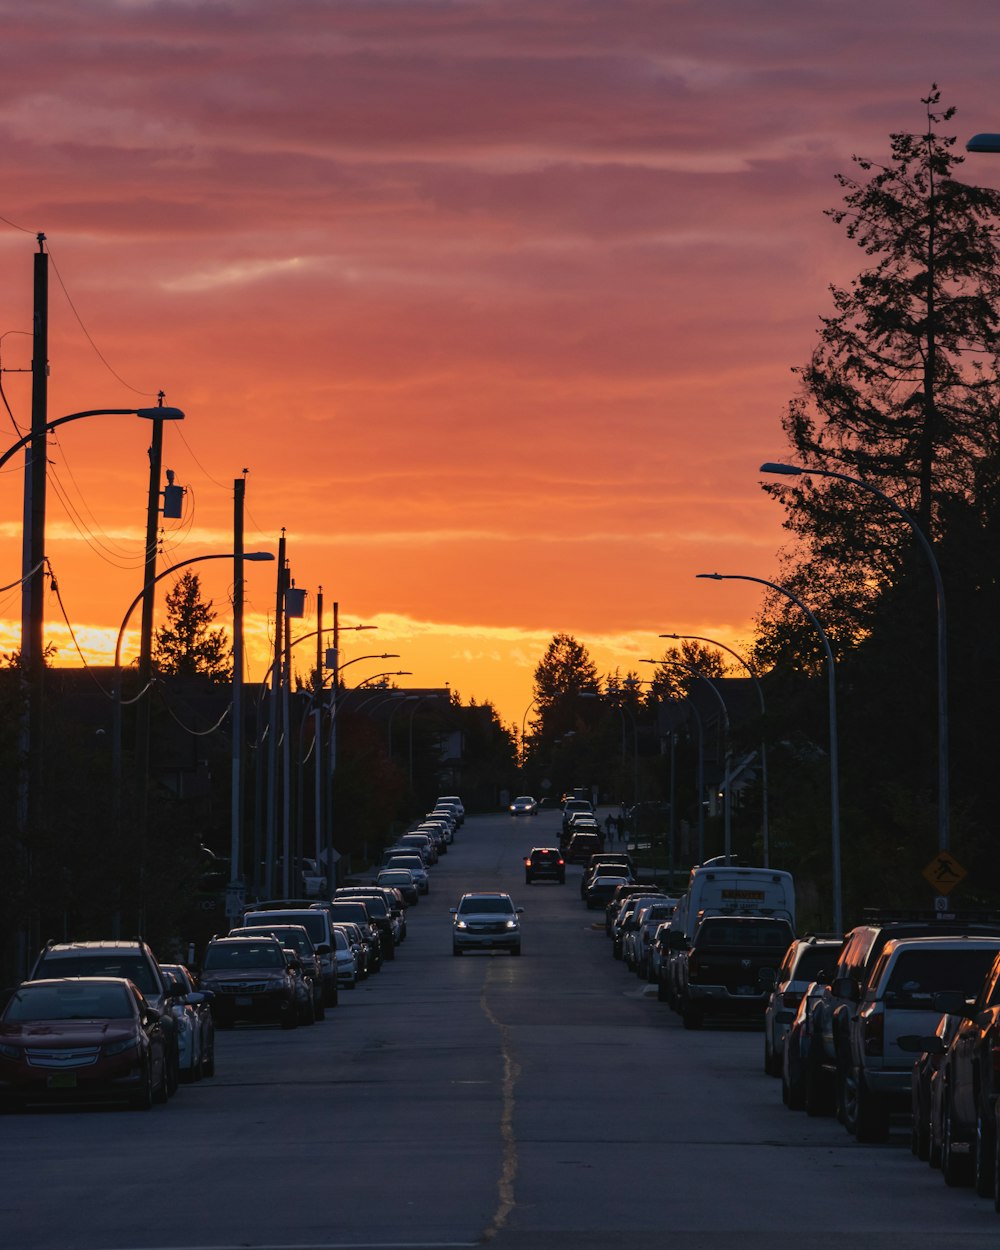 1000+ Sunset Road Pictures | Download Free Images on Unsplash